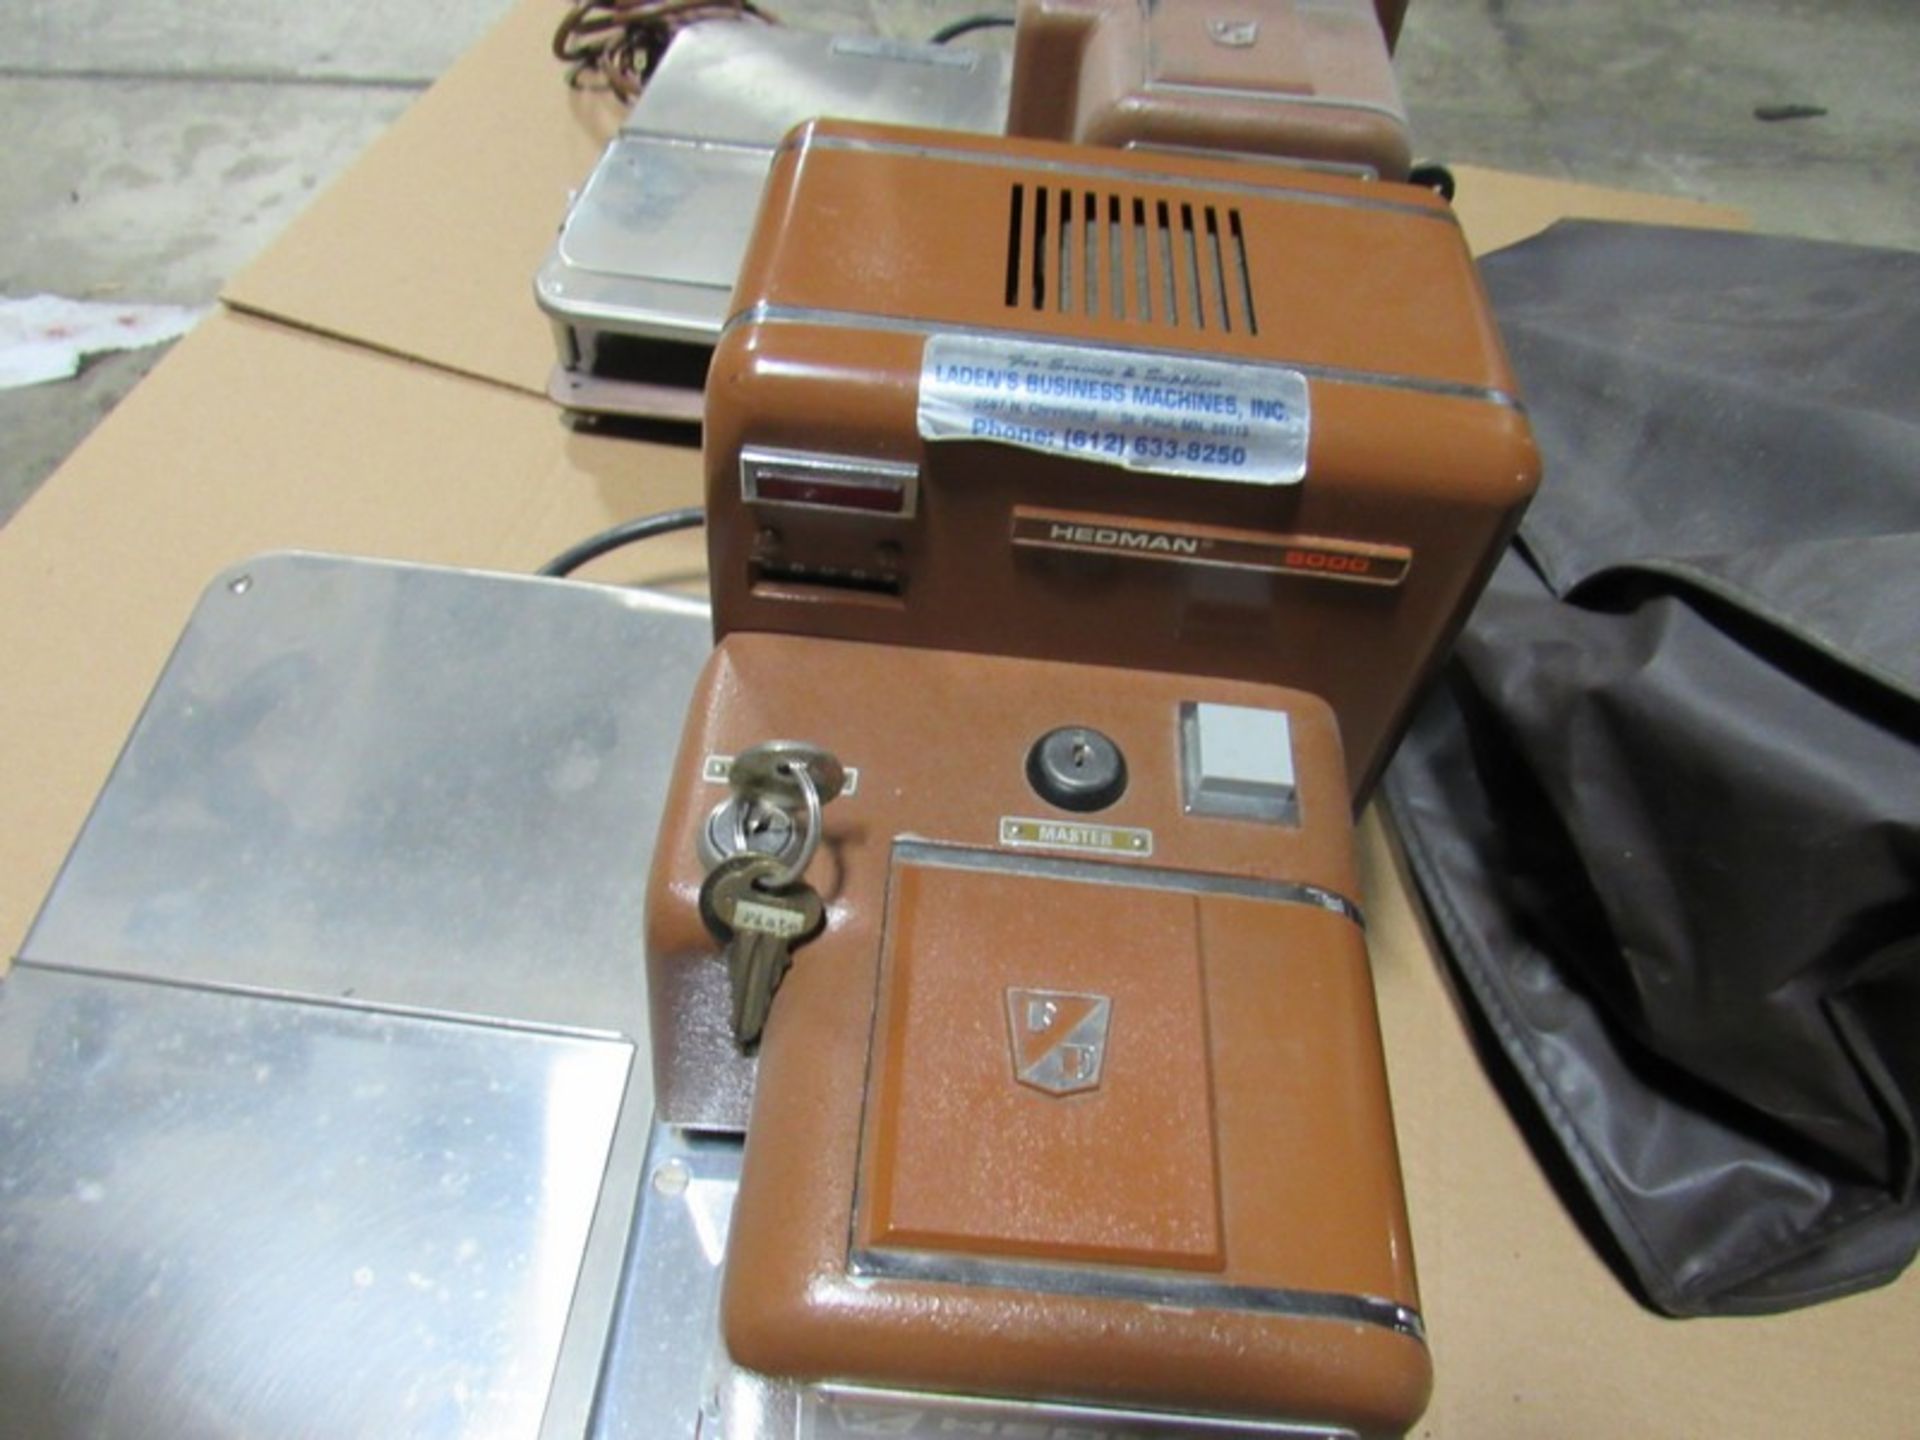 One Lot two Hedman vintage check printer. Free removal and loading; Optional Palletizing $15.